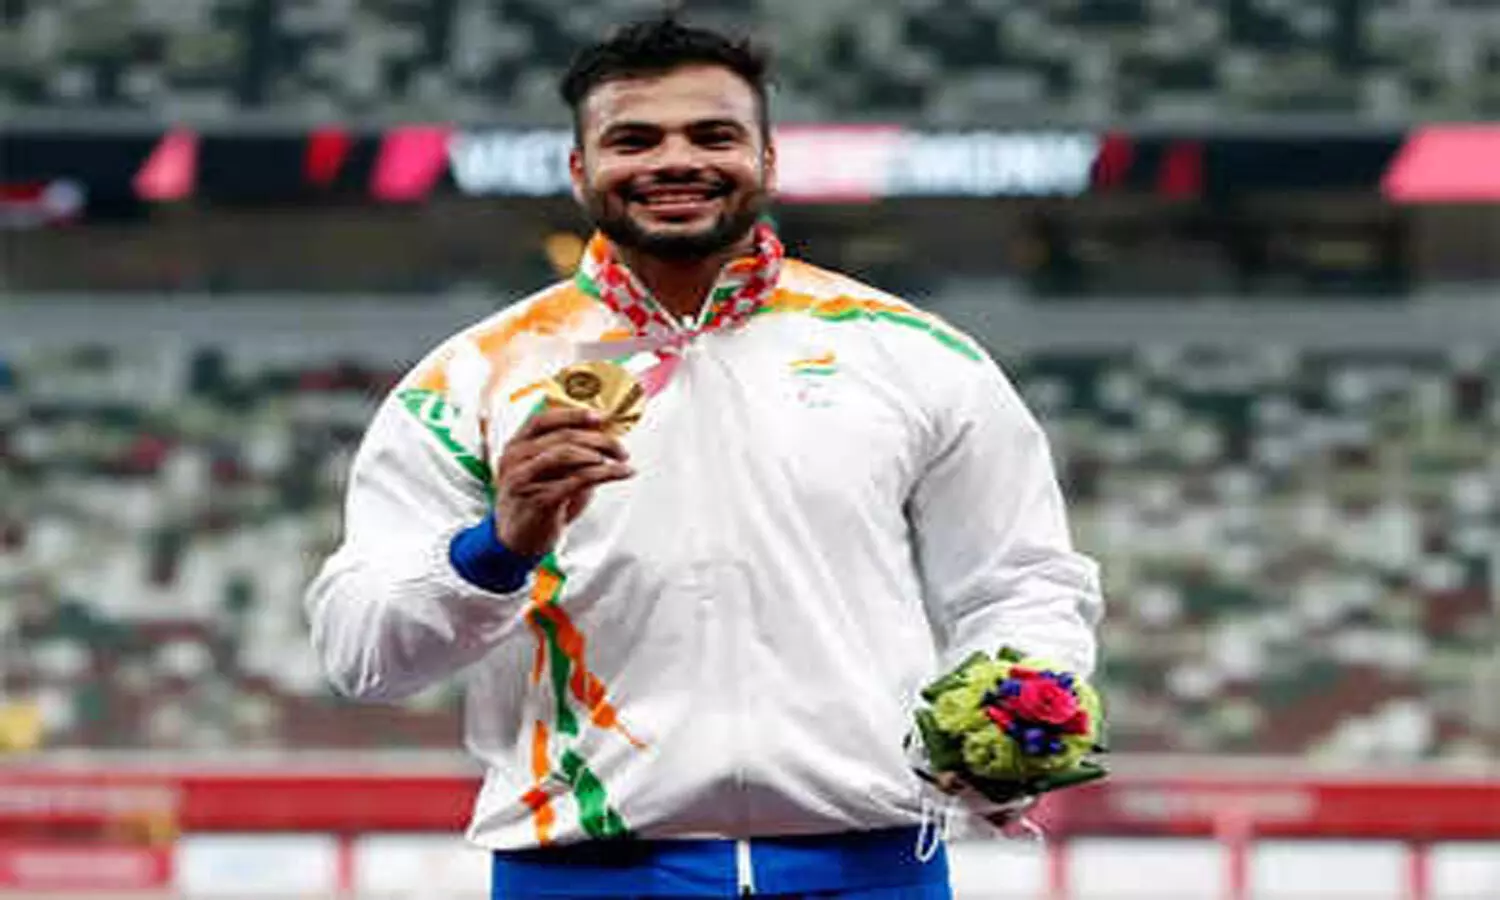 Javelin thrower Sumit Antils family celebrates as he sets new world record with Tokyo gold win